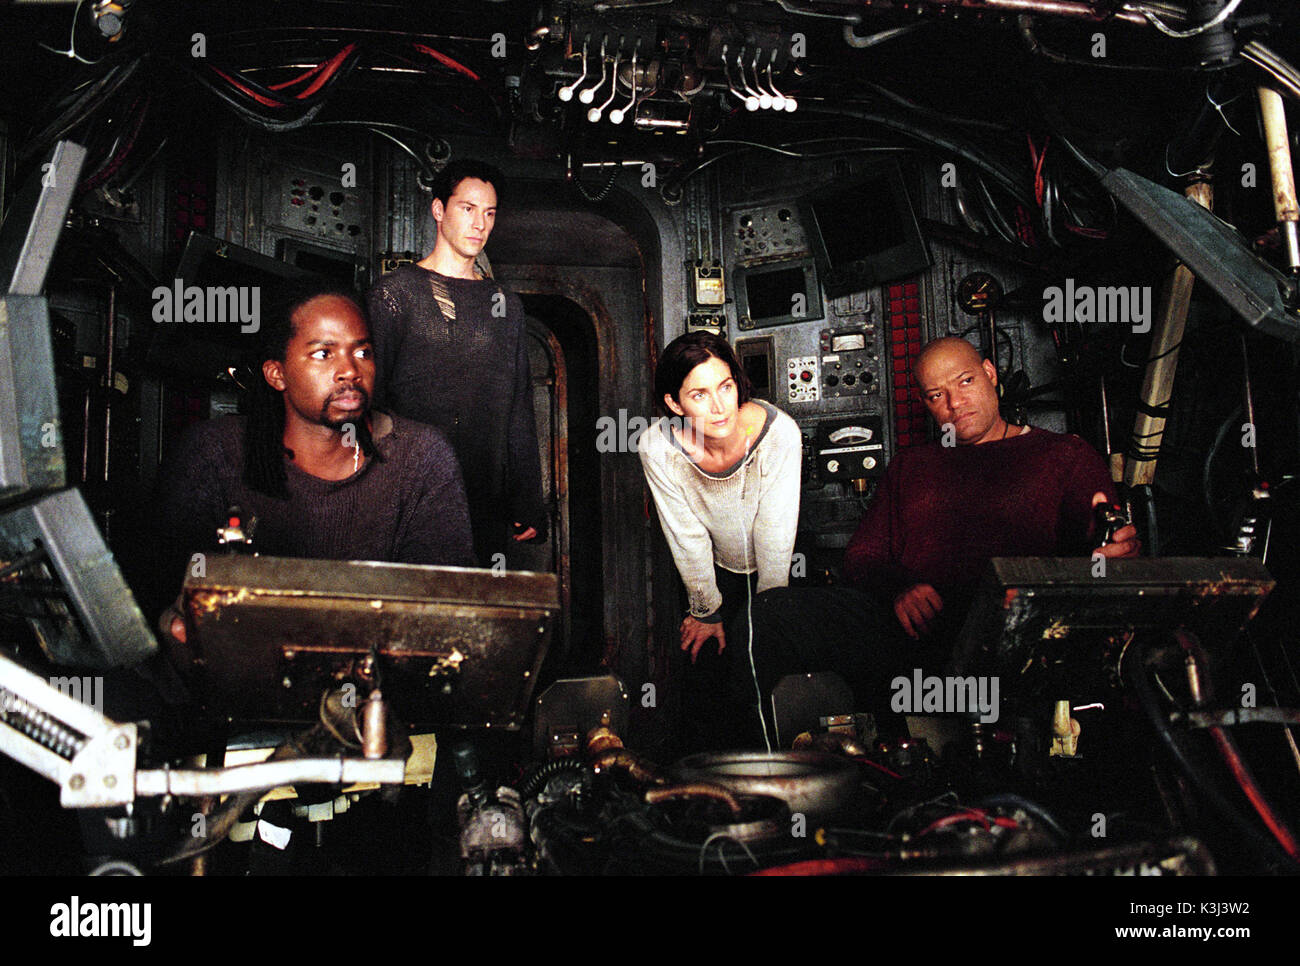 THE MATRIX RELOADED  HAROLD PERRINEAU as Link, KEANU REEVES as Neo, CARRIE-ANNE MOSS as Trinity, LAURENCE FISHBURNE as Morpheus     Date: Stock Photo